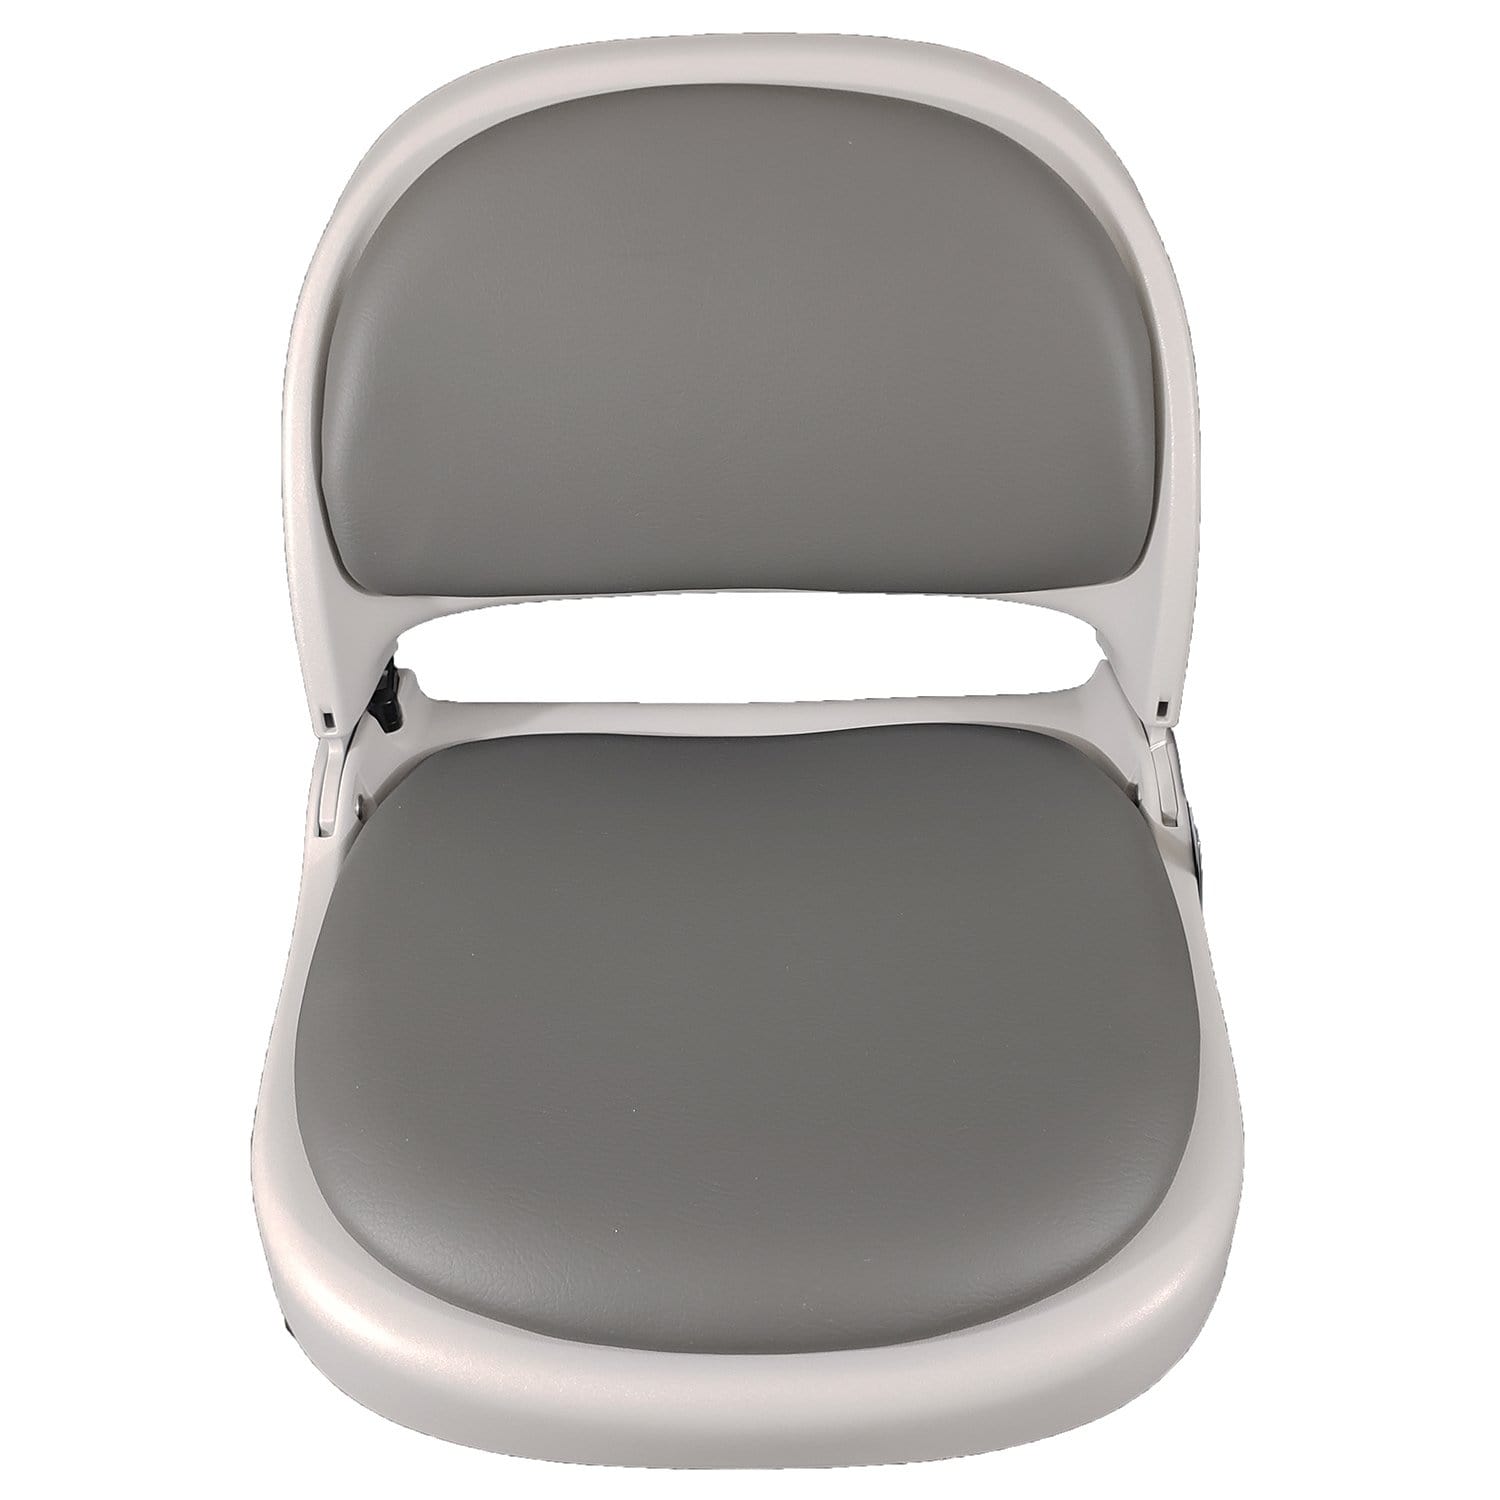 Attwood 7012-504-4 Proform Light Gray Seat with Gray Onserts